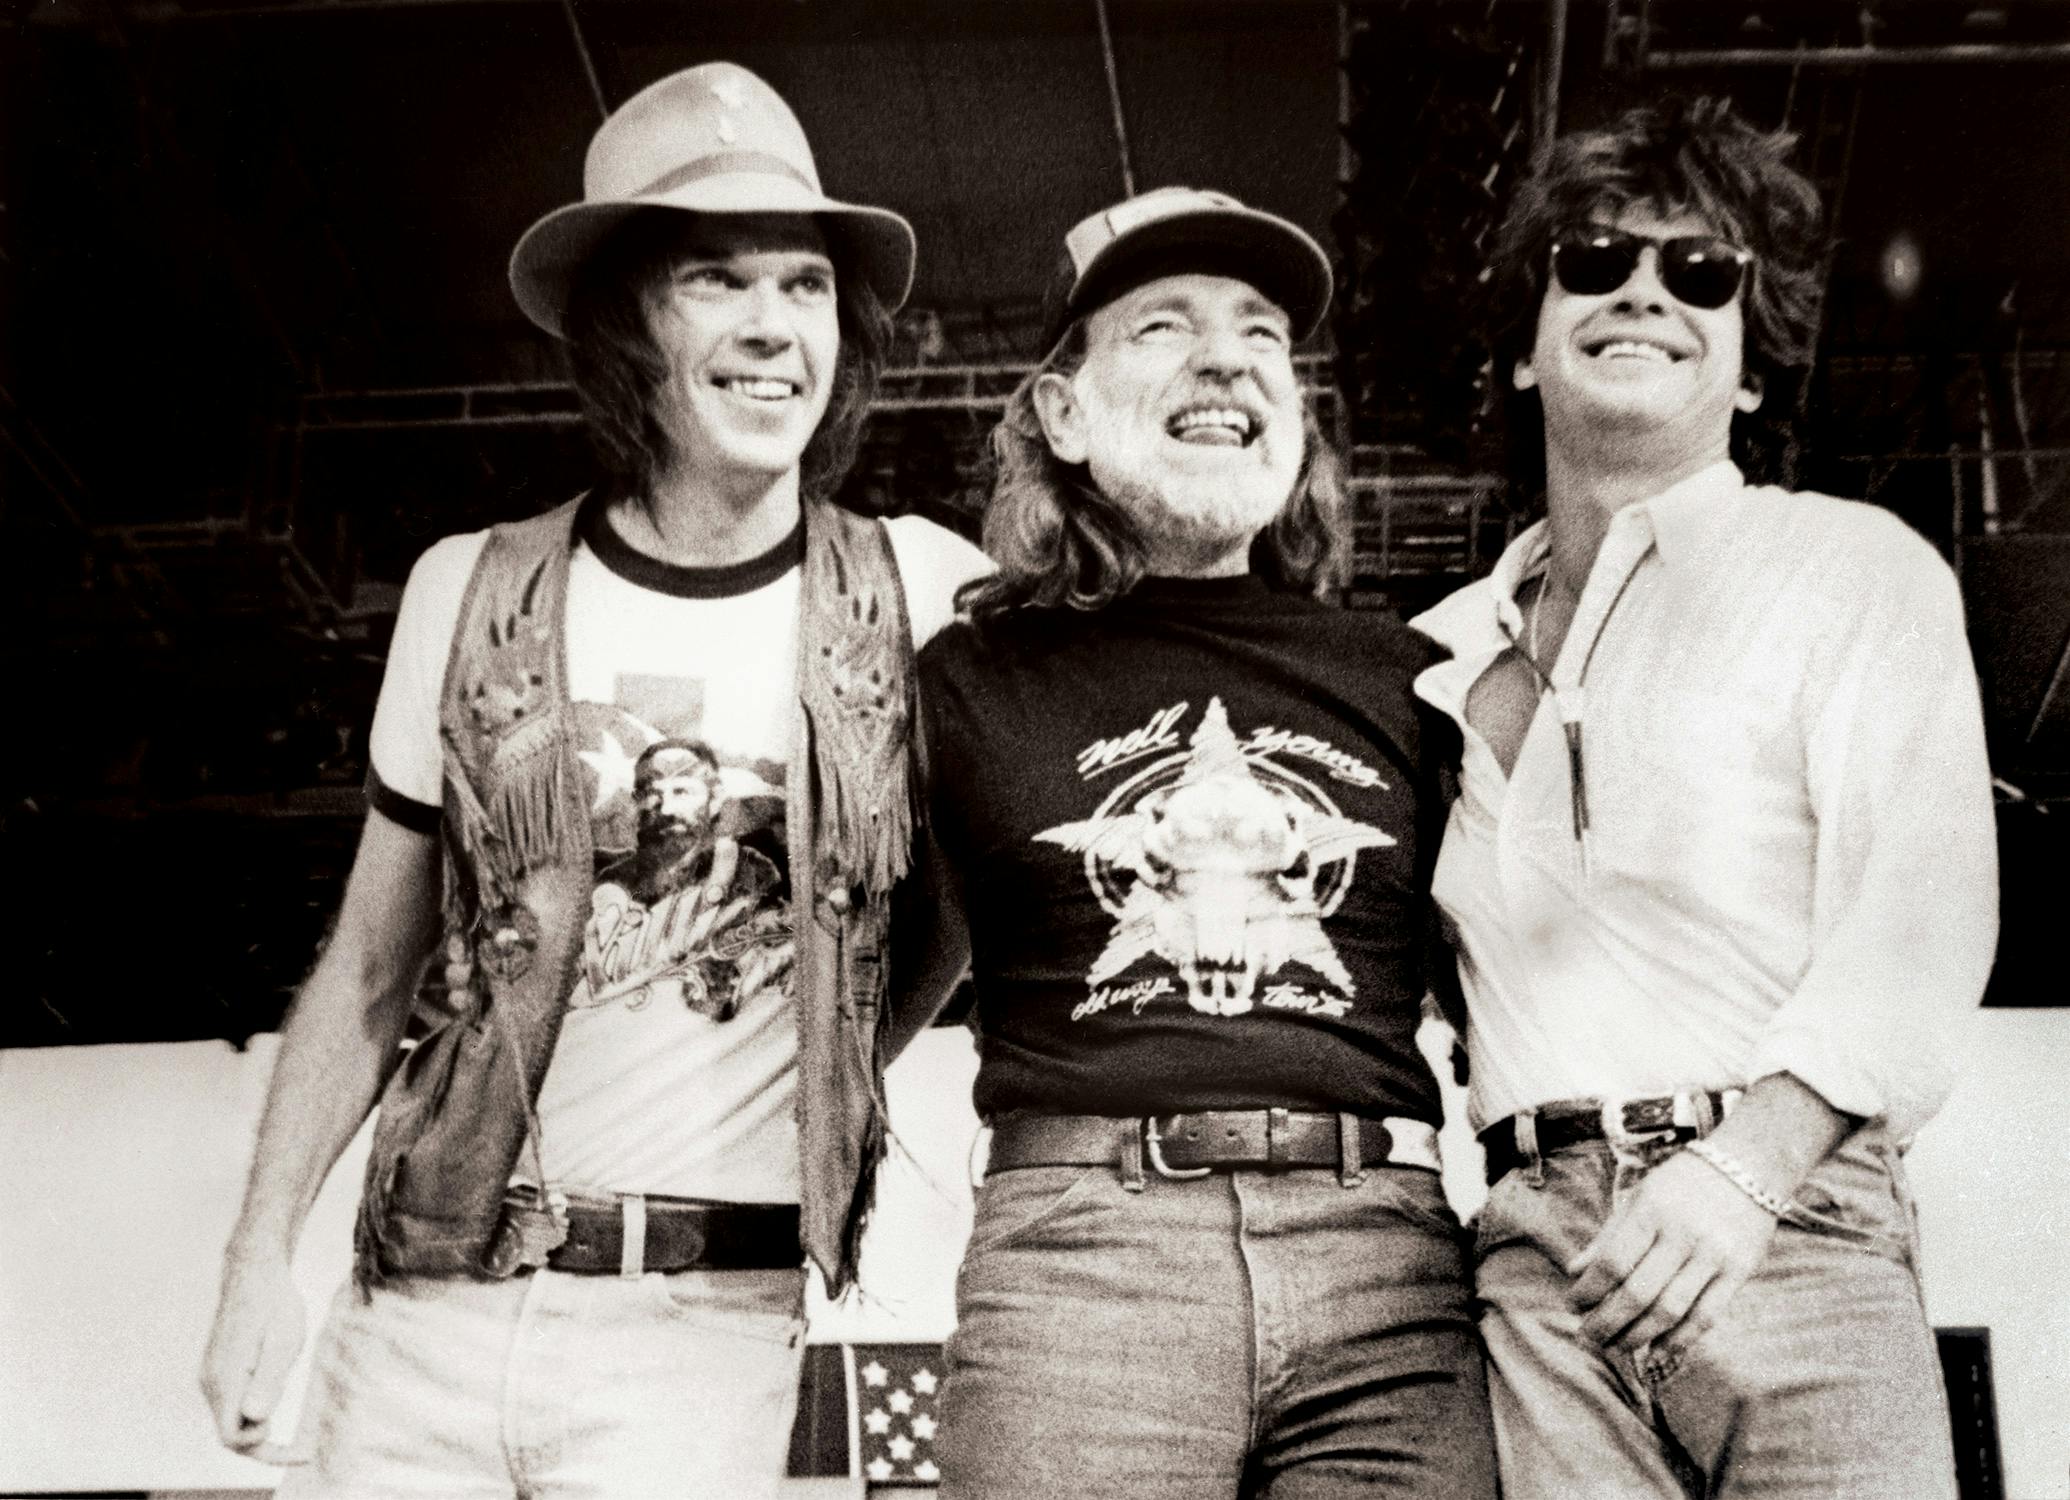 Black and white photograph of Neil Young, Willie, and John Mellencamp smiling on stage. 